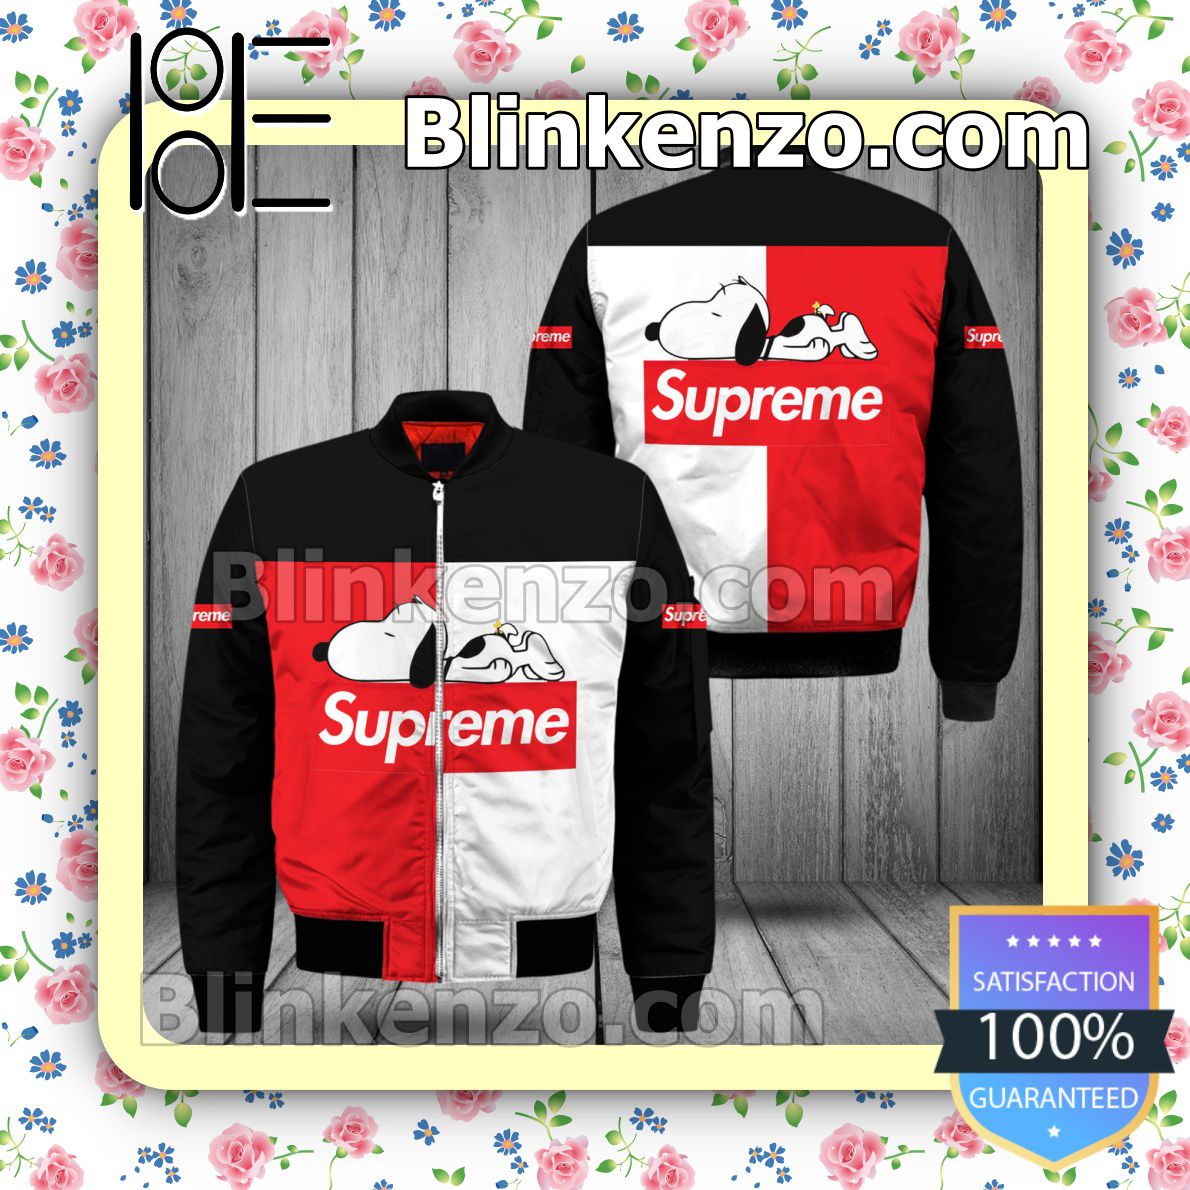 Supreme With Snoopy Black White Red Military Jacket Sportwear